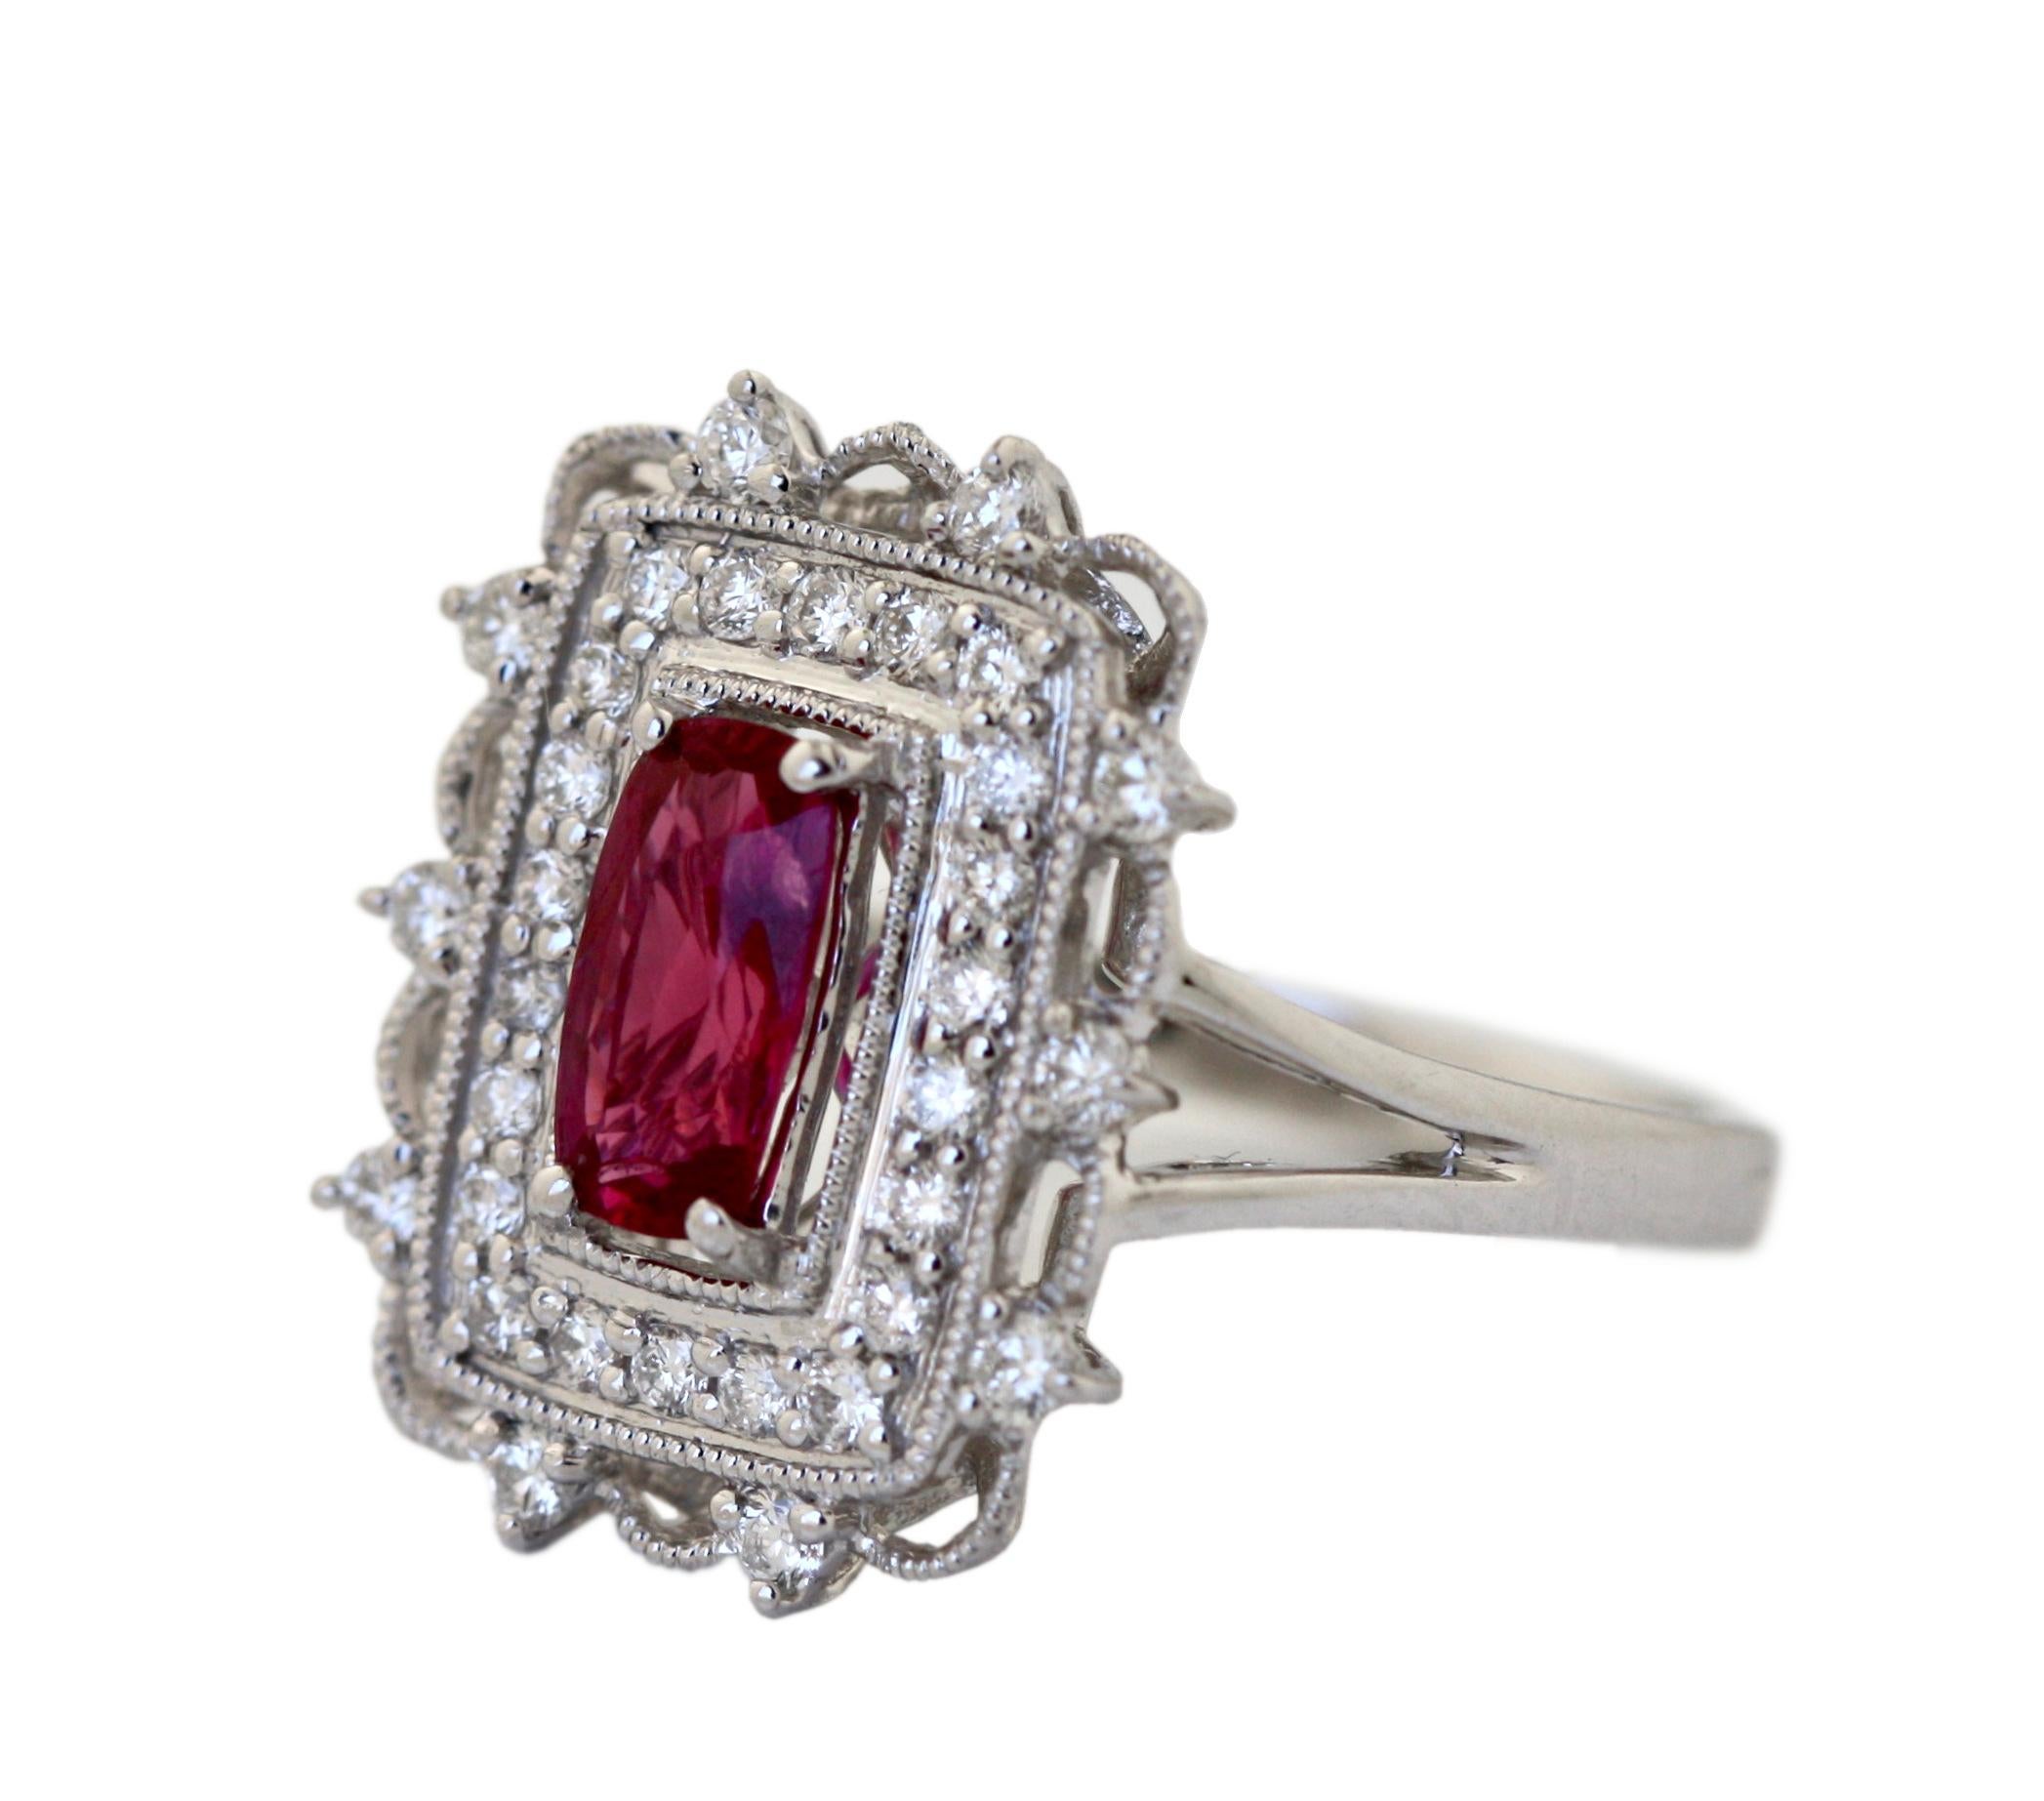 Ruby and Diamond Ring mounted in Platinum
Ruby weighing 1.00 carat, Diamonds weighing approximately 0.52 carat, 
size 7 1/2 
Authentication:
accompanied with GIA report 2203910949